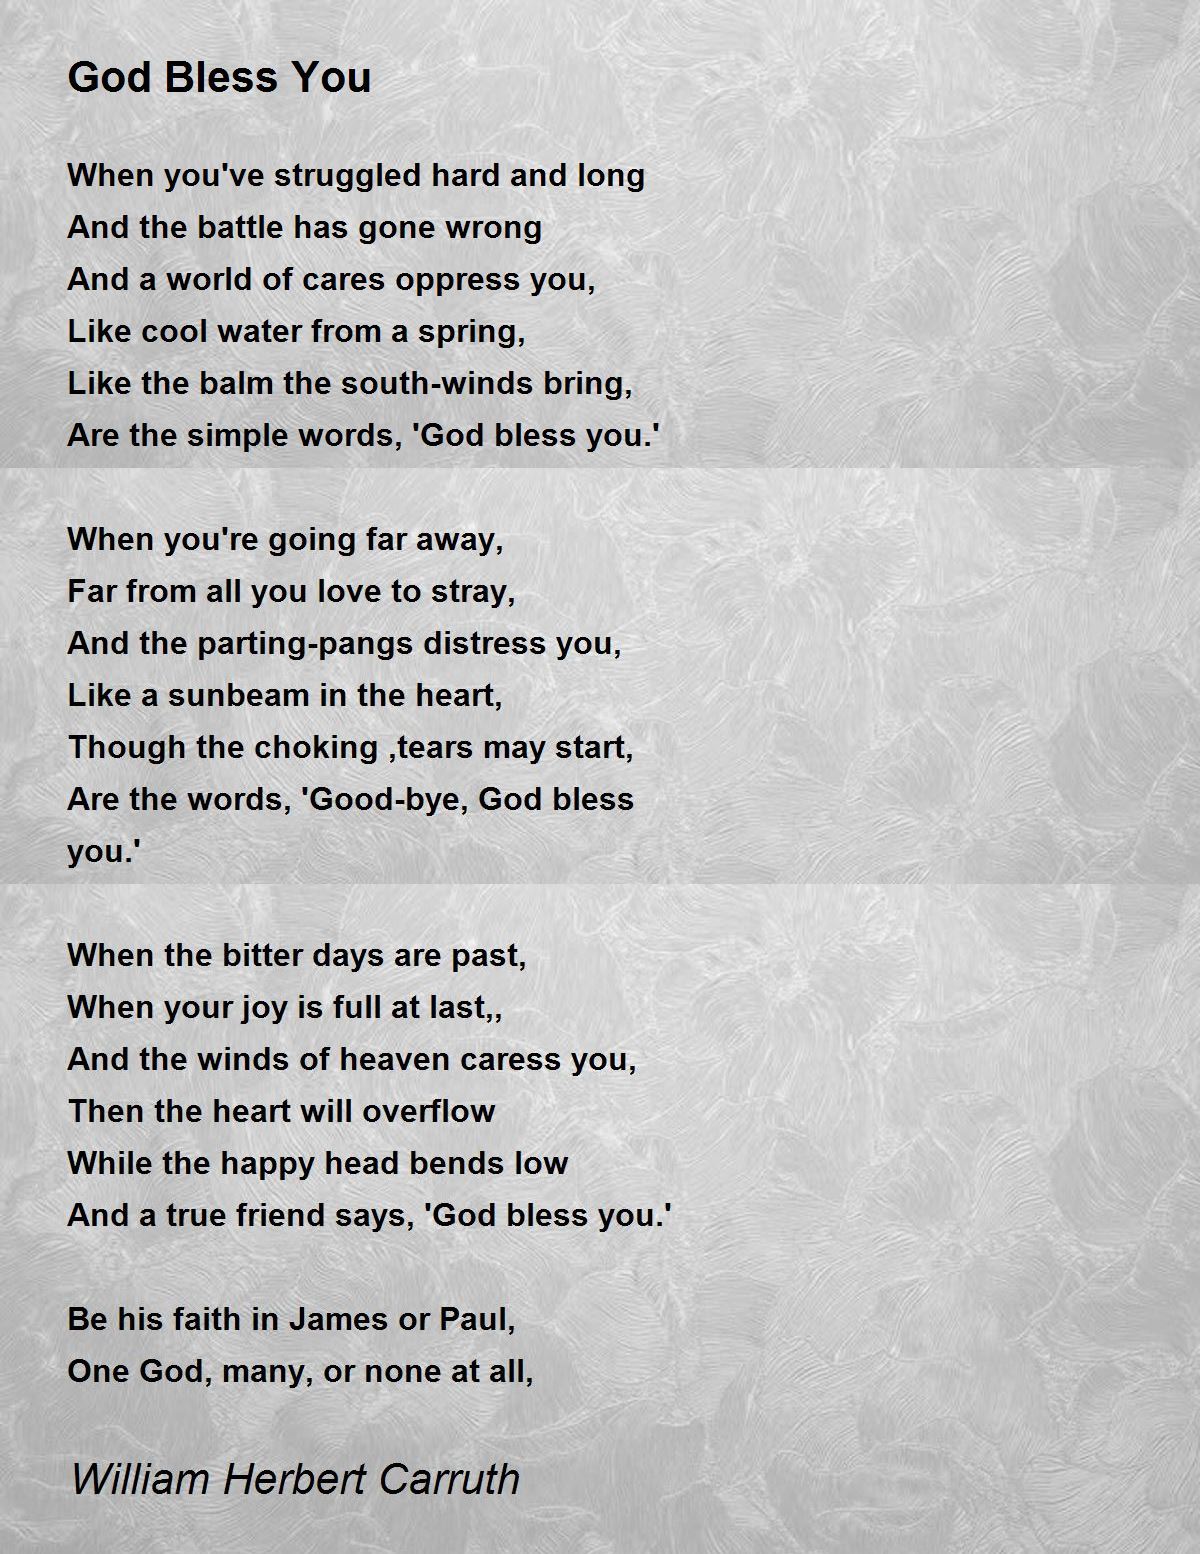 God Bless You - God Bless You Poem by William Herbert Carruth